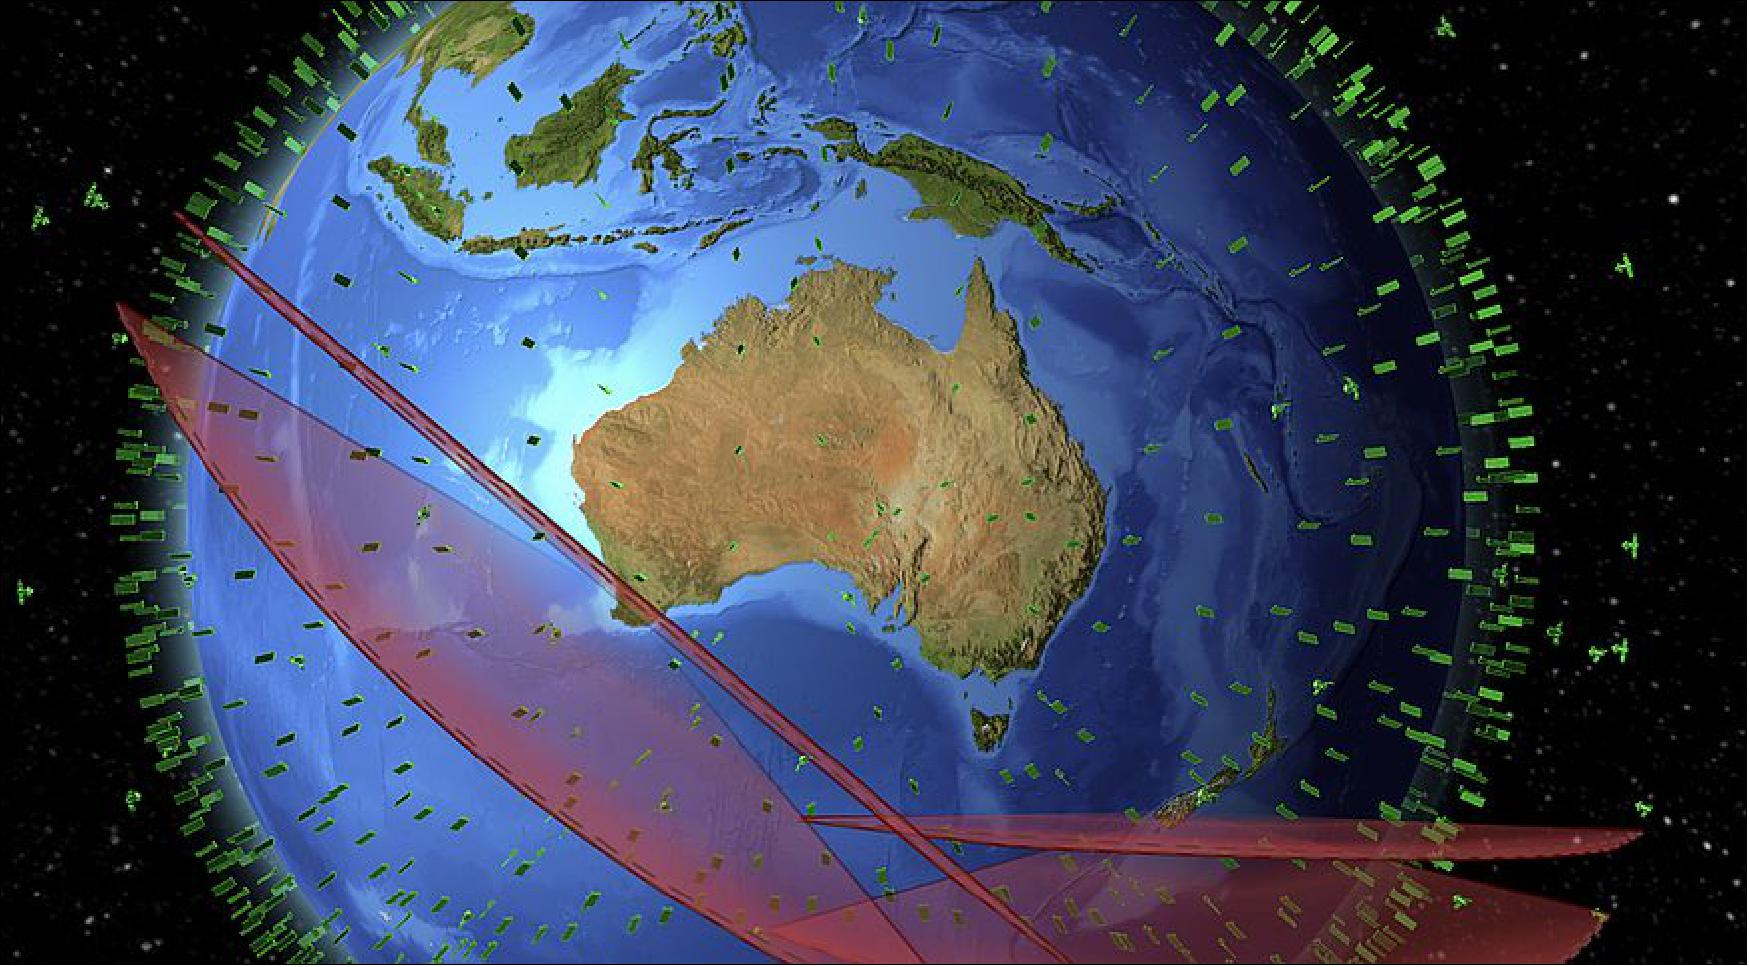 Figure 11: West Australian Space Radar conceptual field of view in LeoLabs Mapping and Analytics Platform (image credit: LeoLabs)